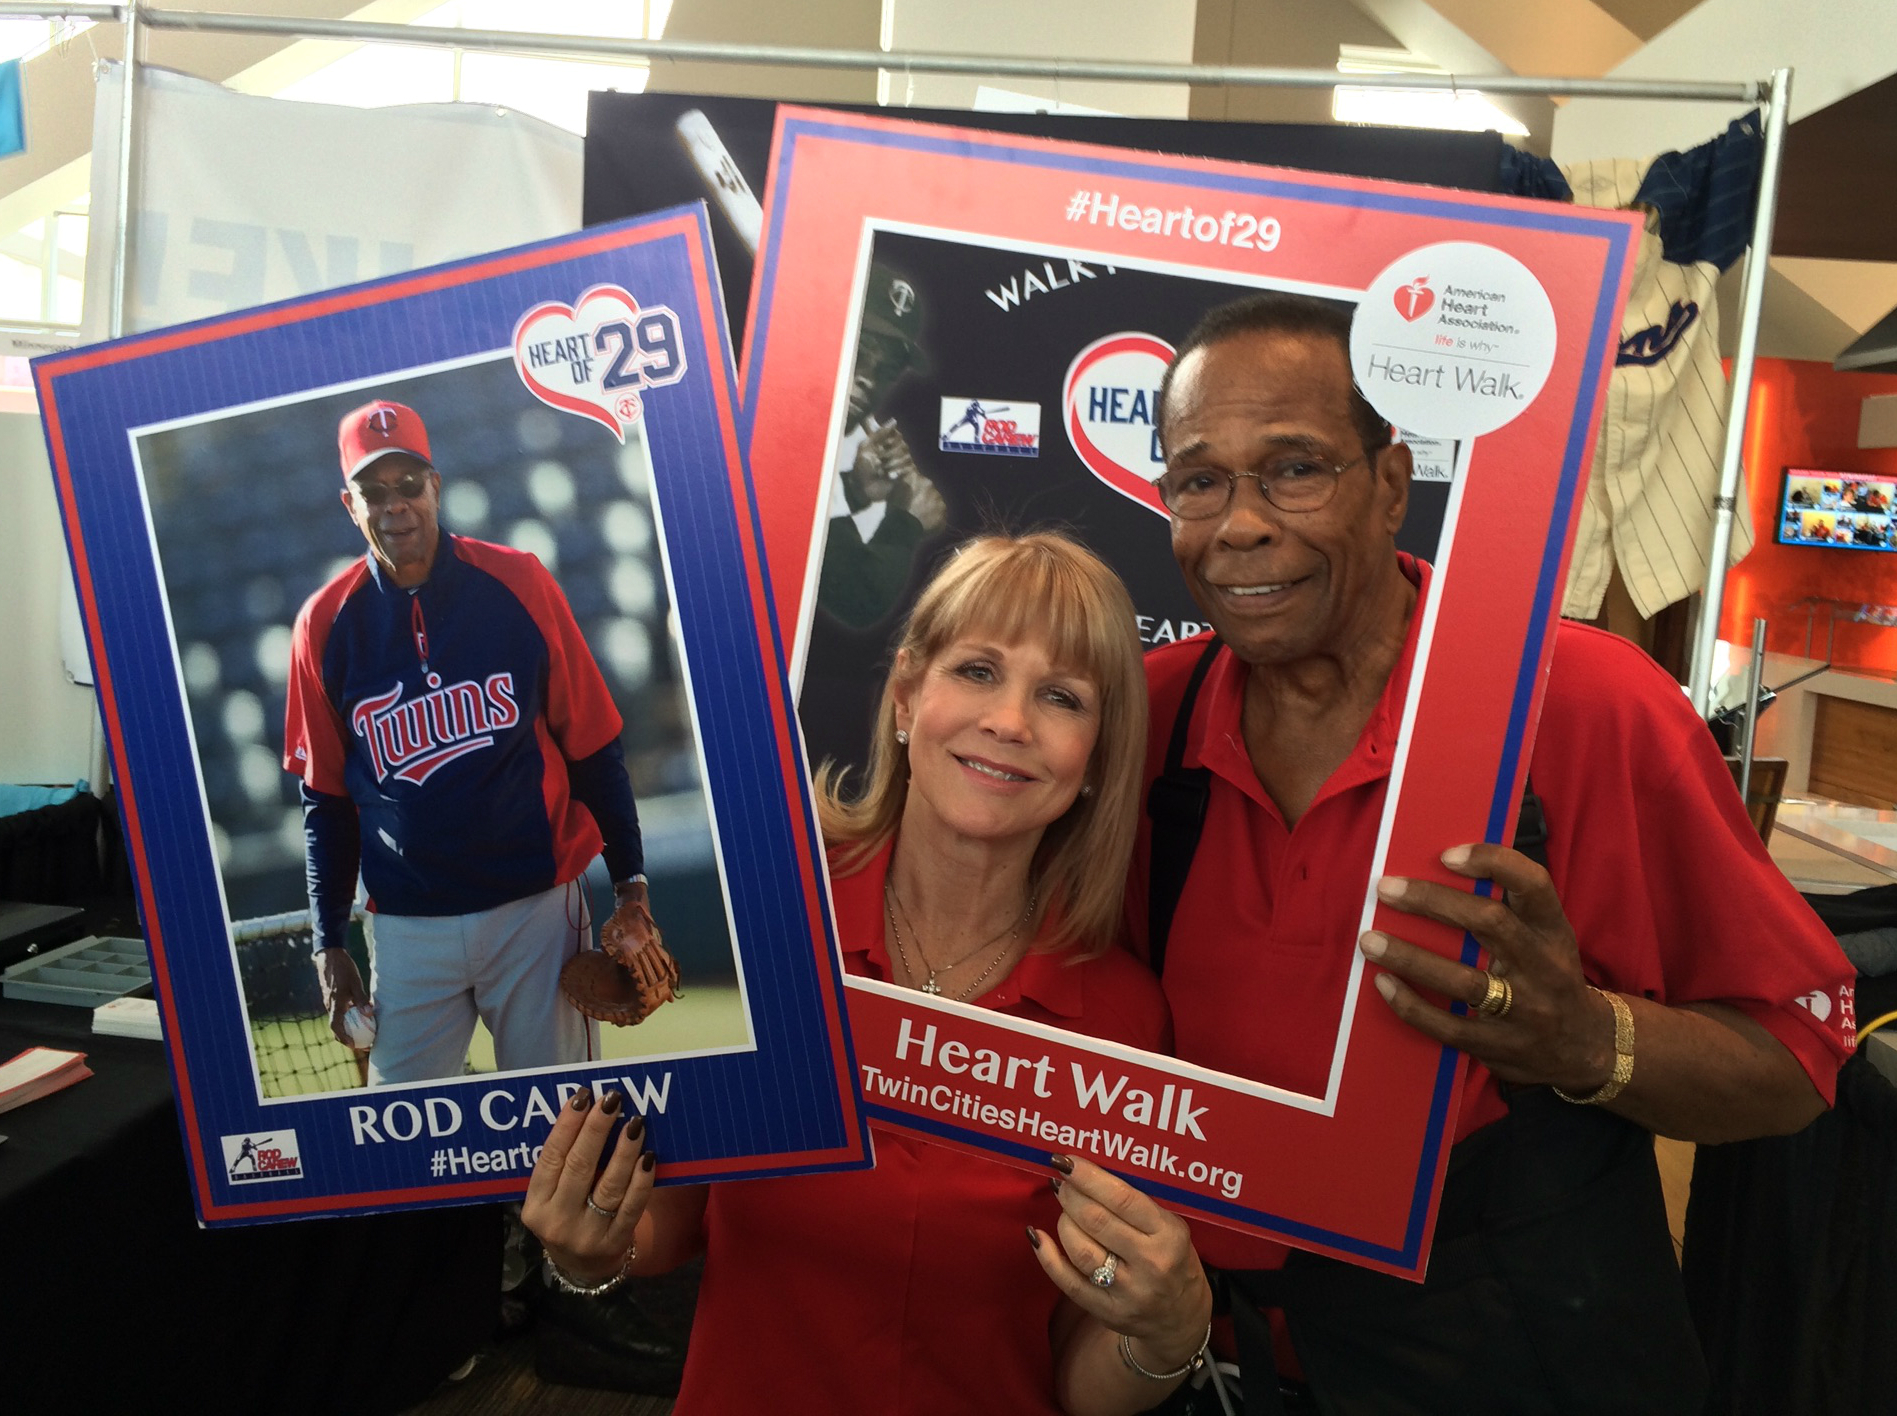 Rod Carew recovering from massive heart attack with a life-saving device  pumping blood through his body – Orange County Register